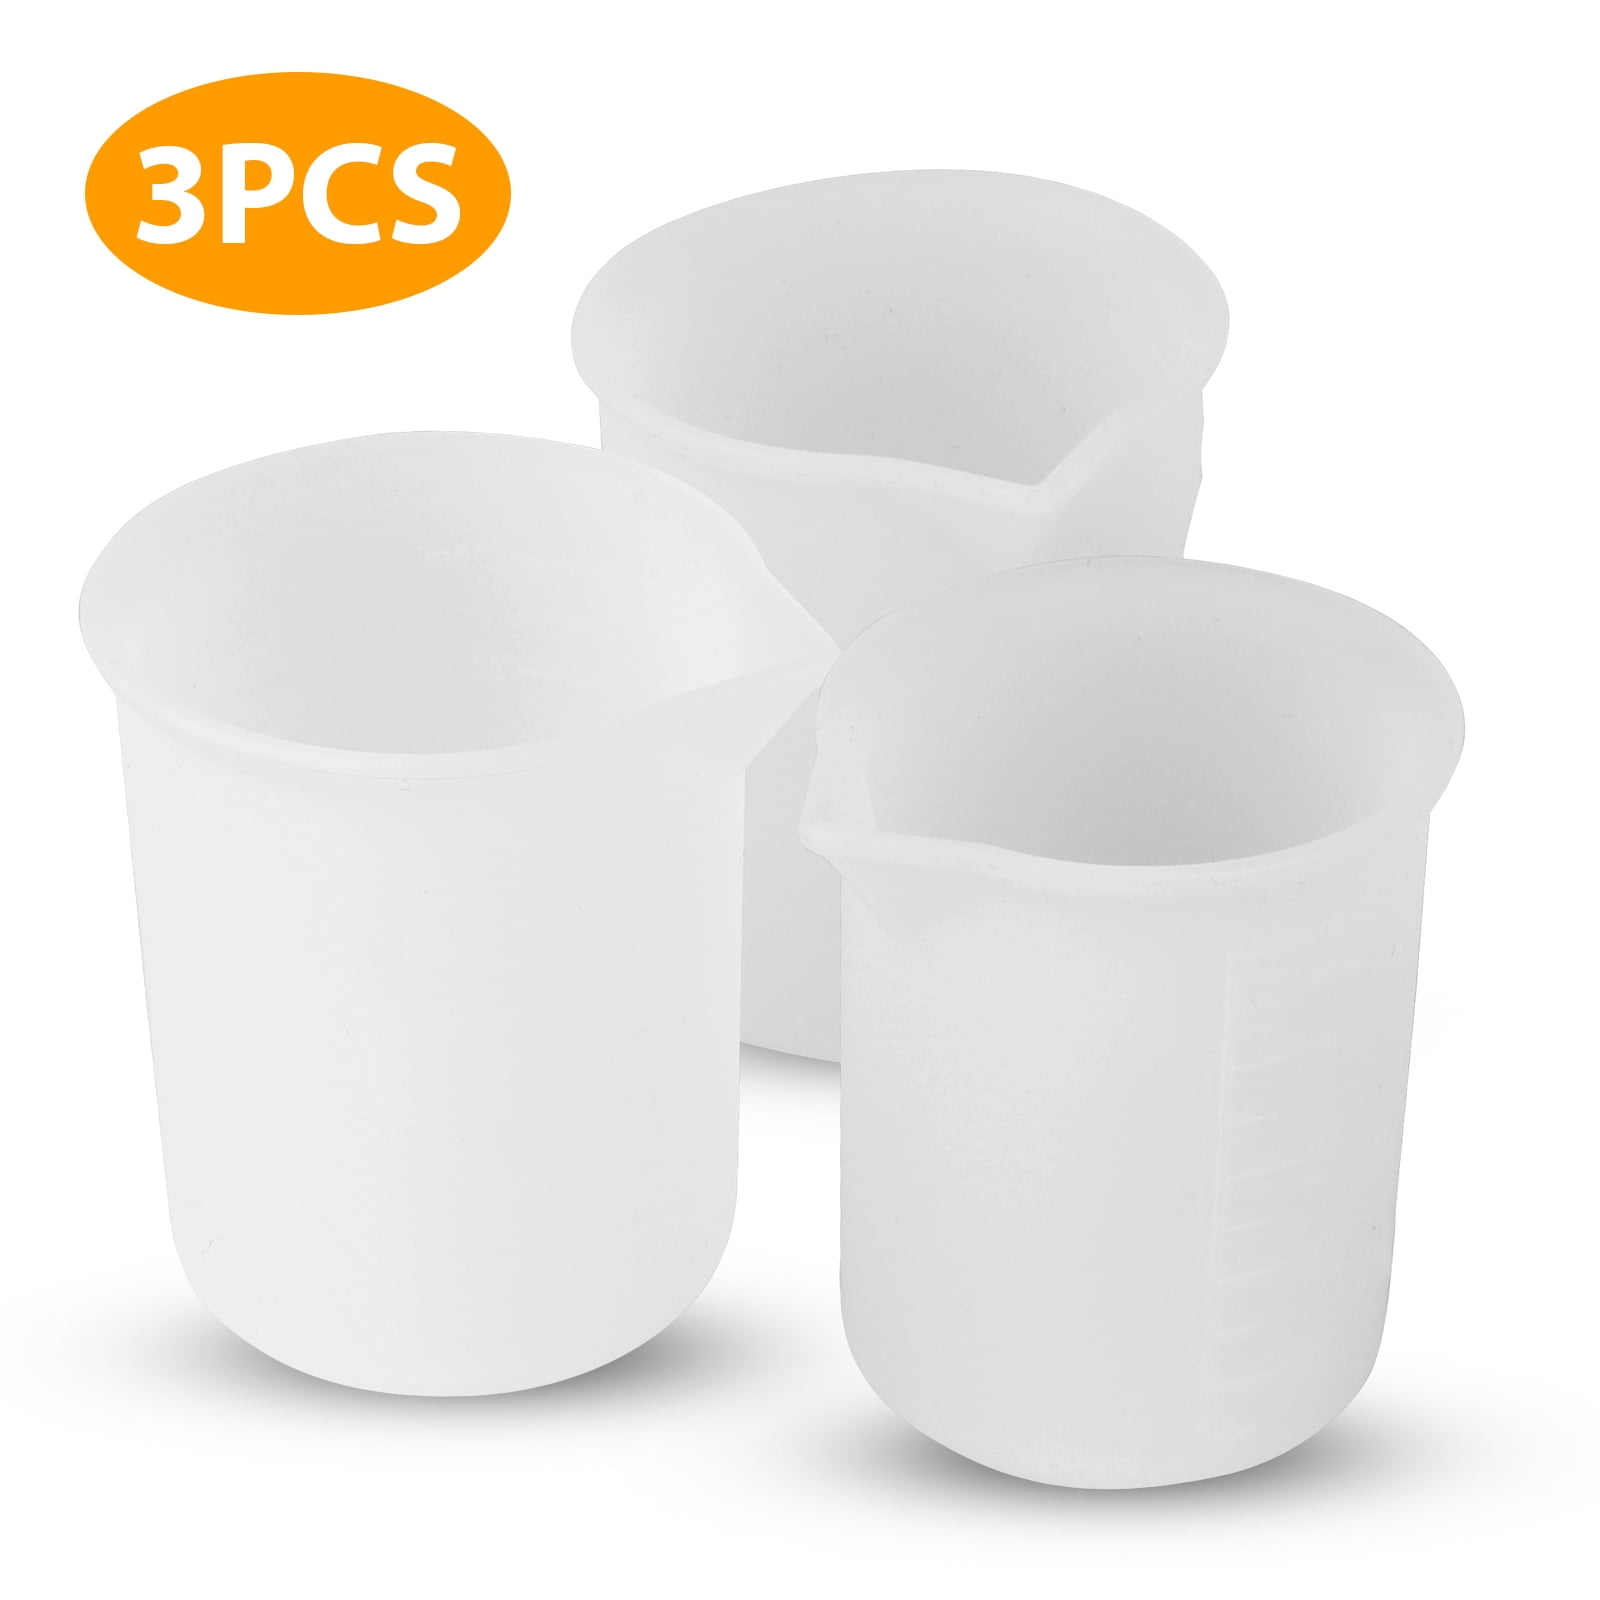 10pcs 100ml Silicone Cups Non Stick Mixing Cups DIY Glue Tools Cup for sale  online